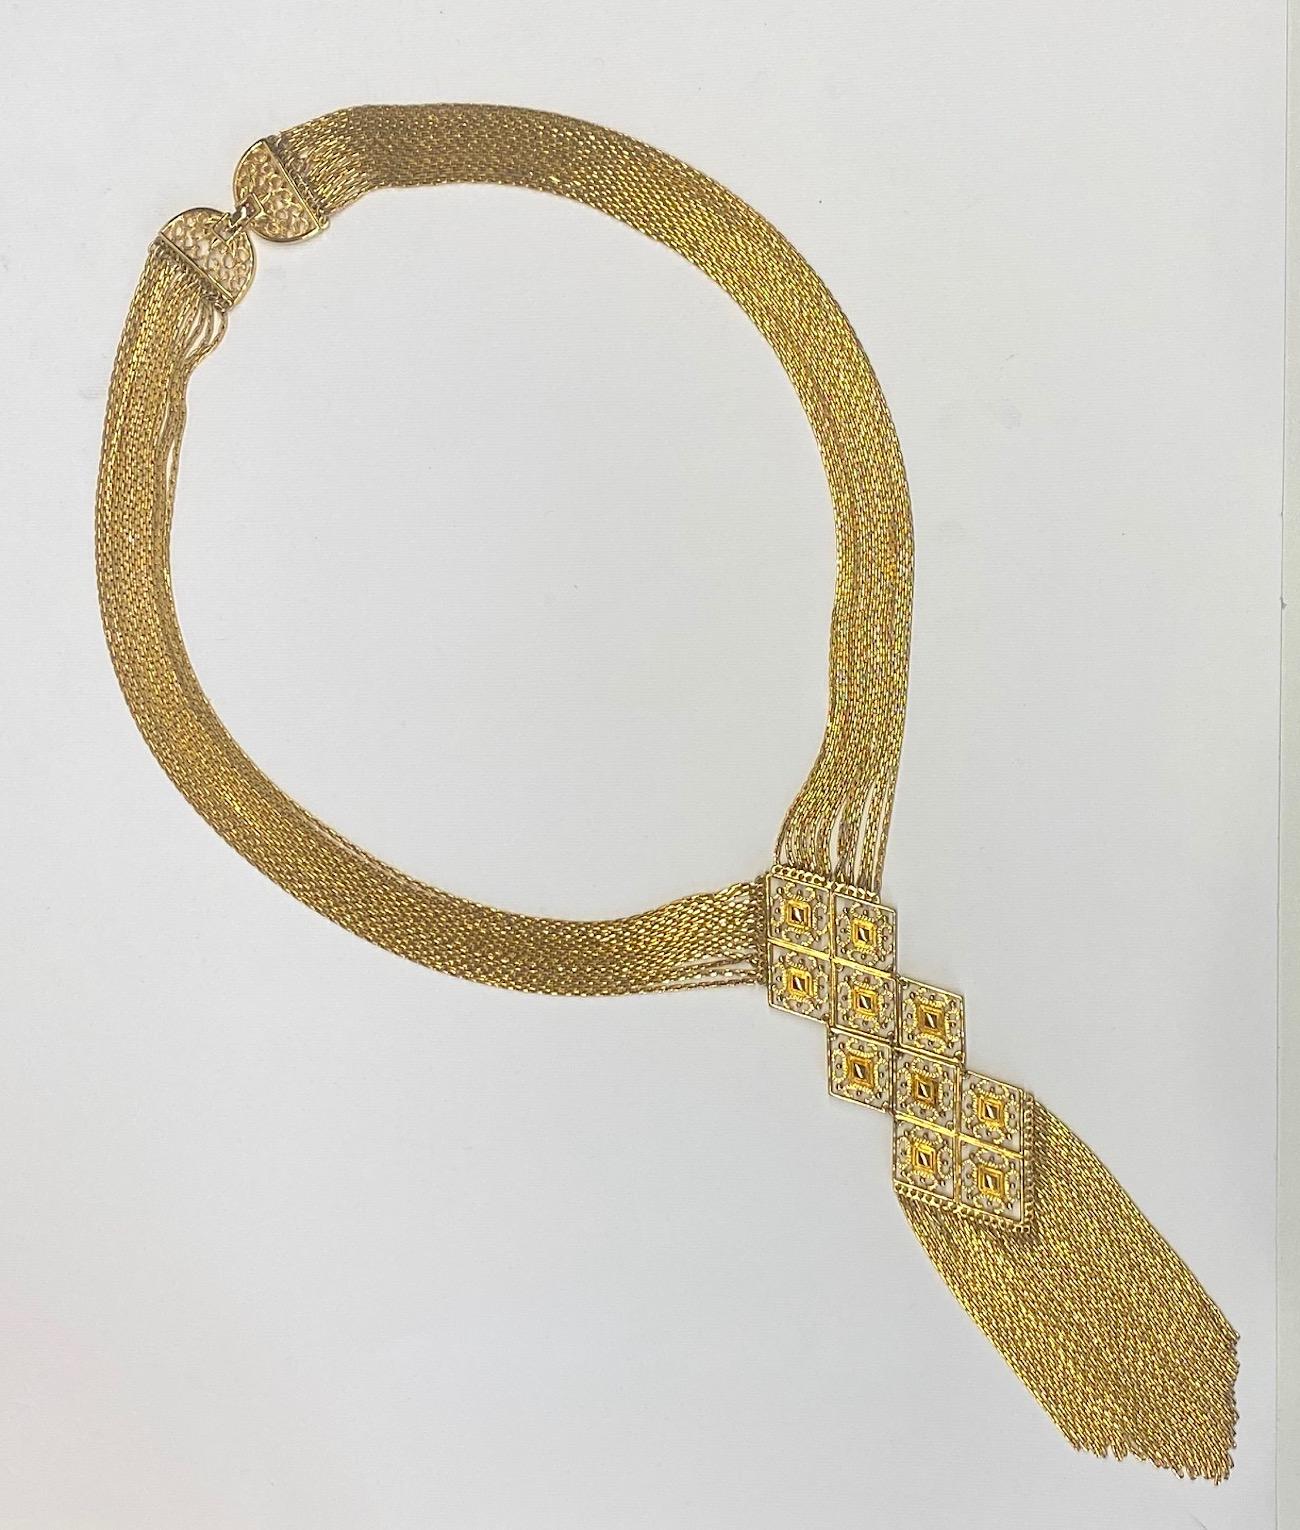 A late 1960s to early 1970s beautifully made multi strand pendant fringe necklace from the well established American fashion jewelry company Monet. The gold plate necklace is comprised of thirteen 1.5 mm wide cable links strands that support a 1.75